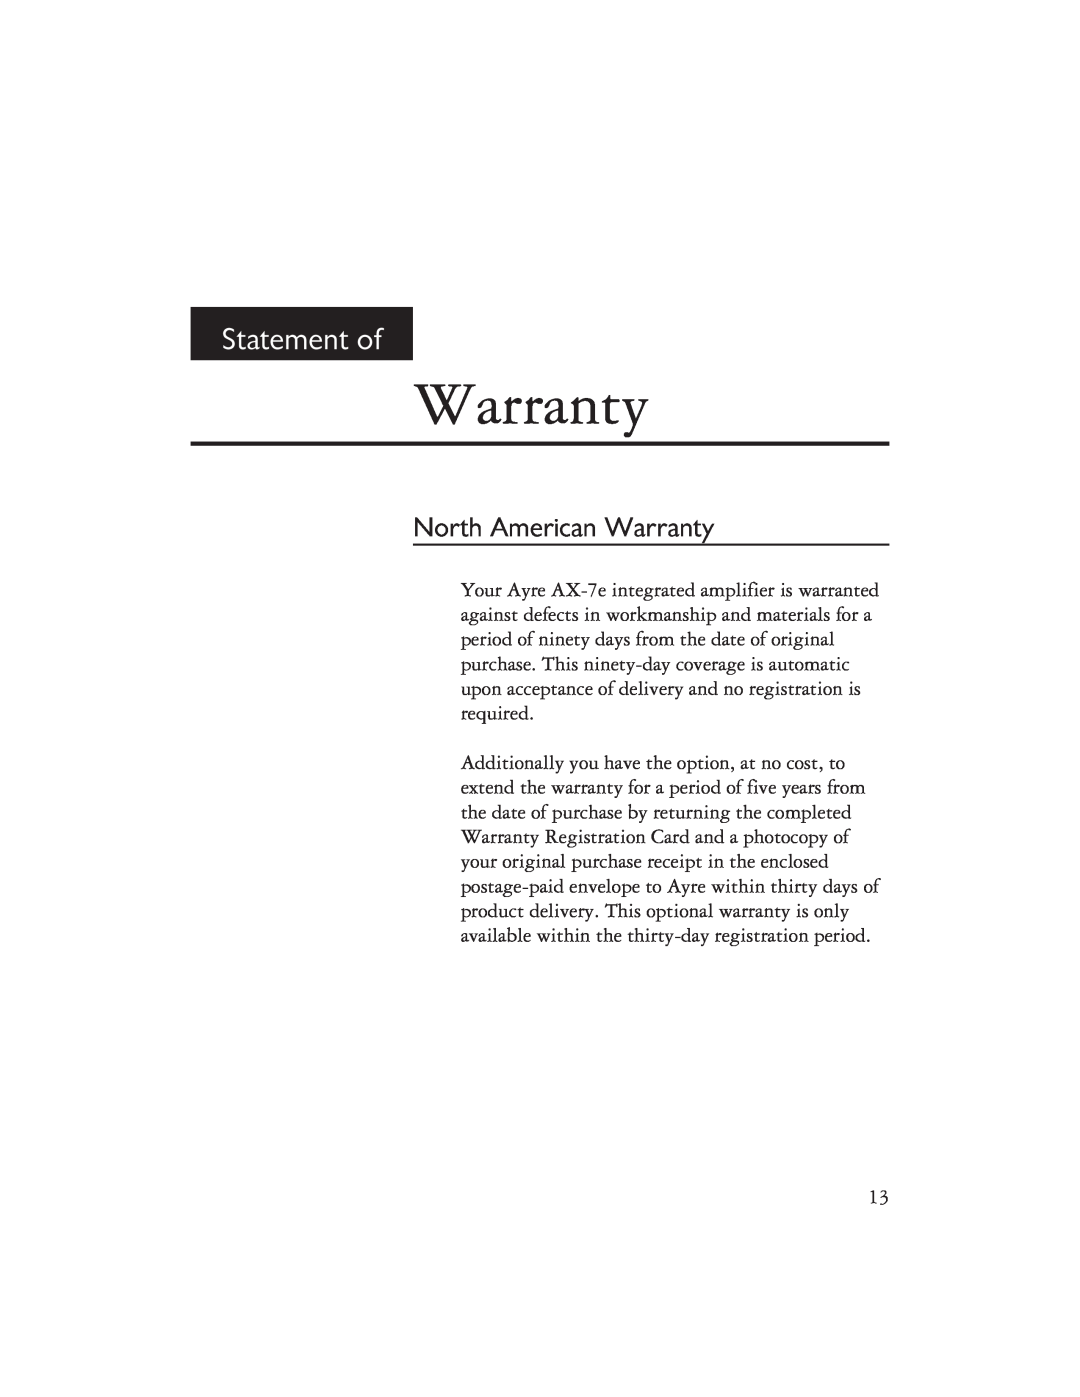 Ayre Acoustics AX-7E owner manual Statement of, North American Warranty 